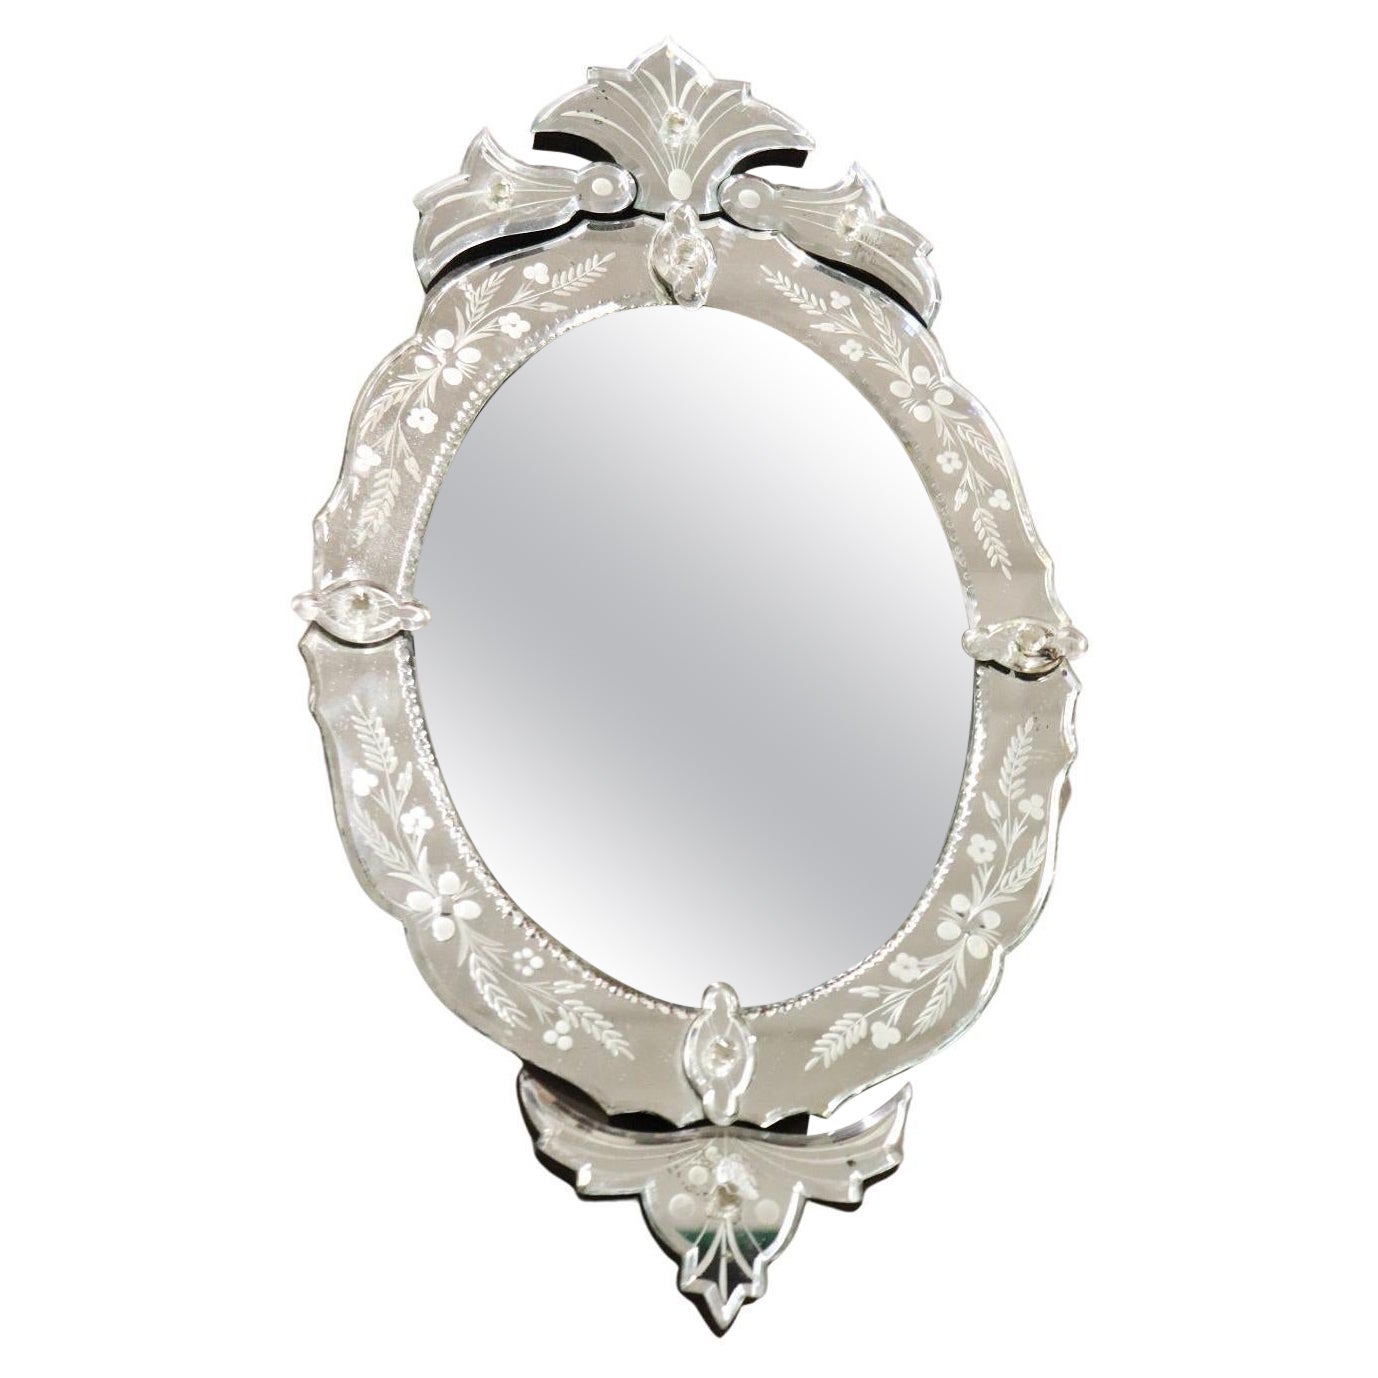 Early 20th Century Italian Murano Oval Wall Mirror For Sale